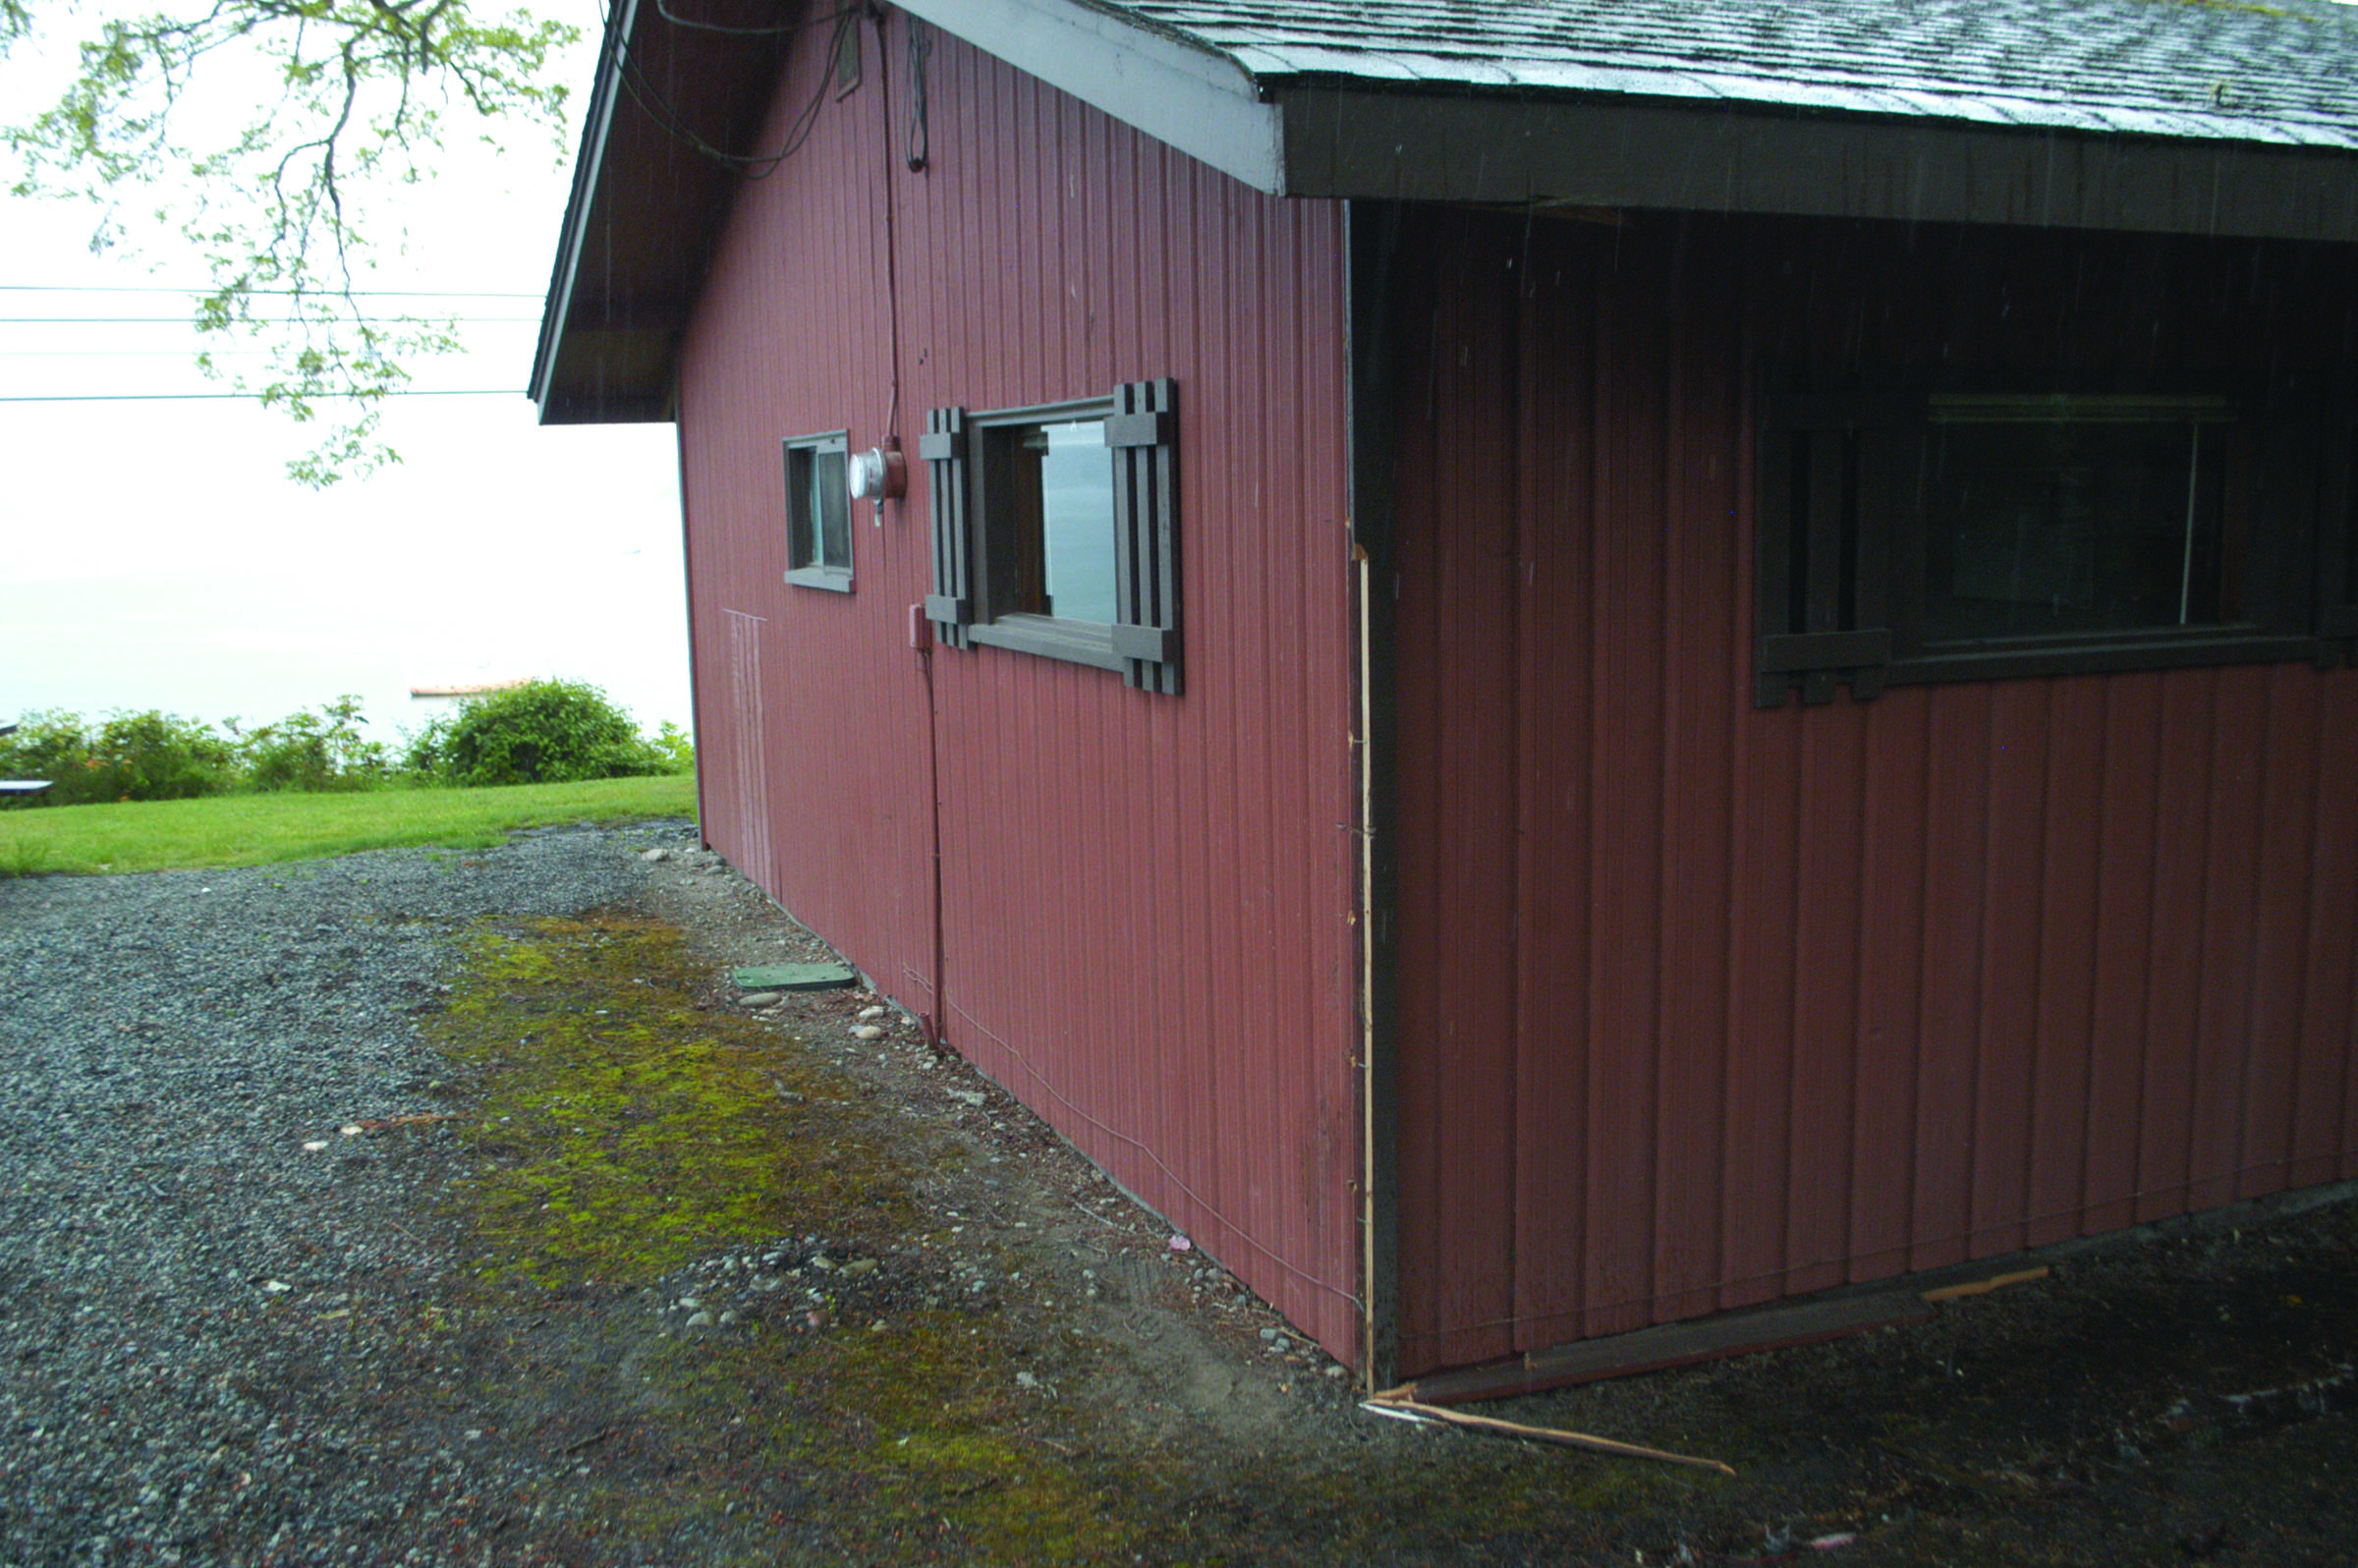 After allegedly stealing a vehicle at 2643 West Sequim Bay Road cabin No. 2